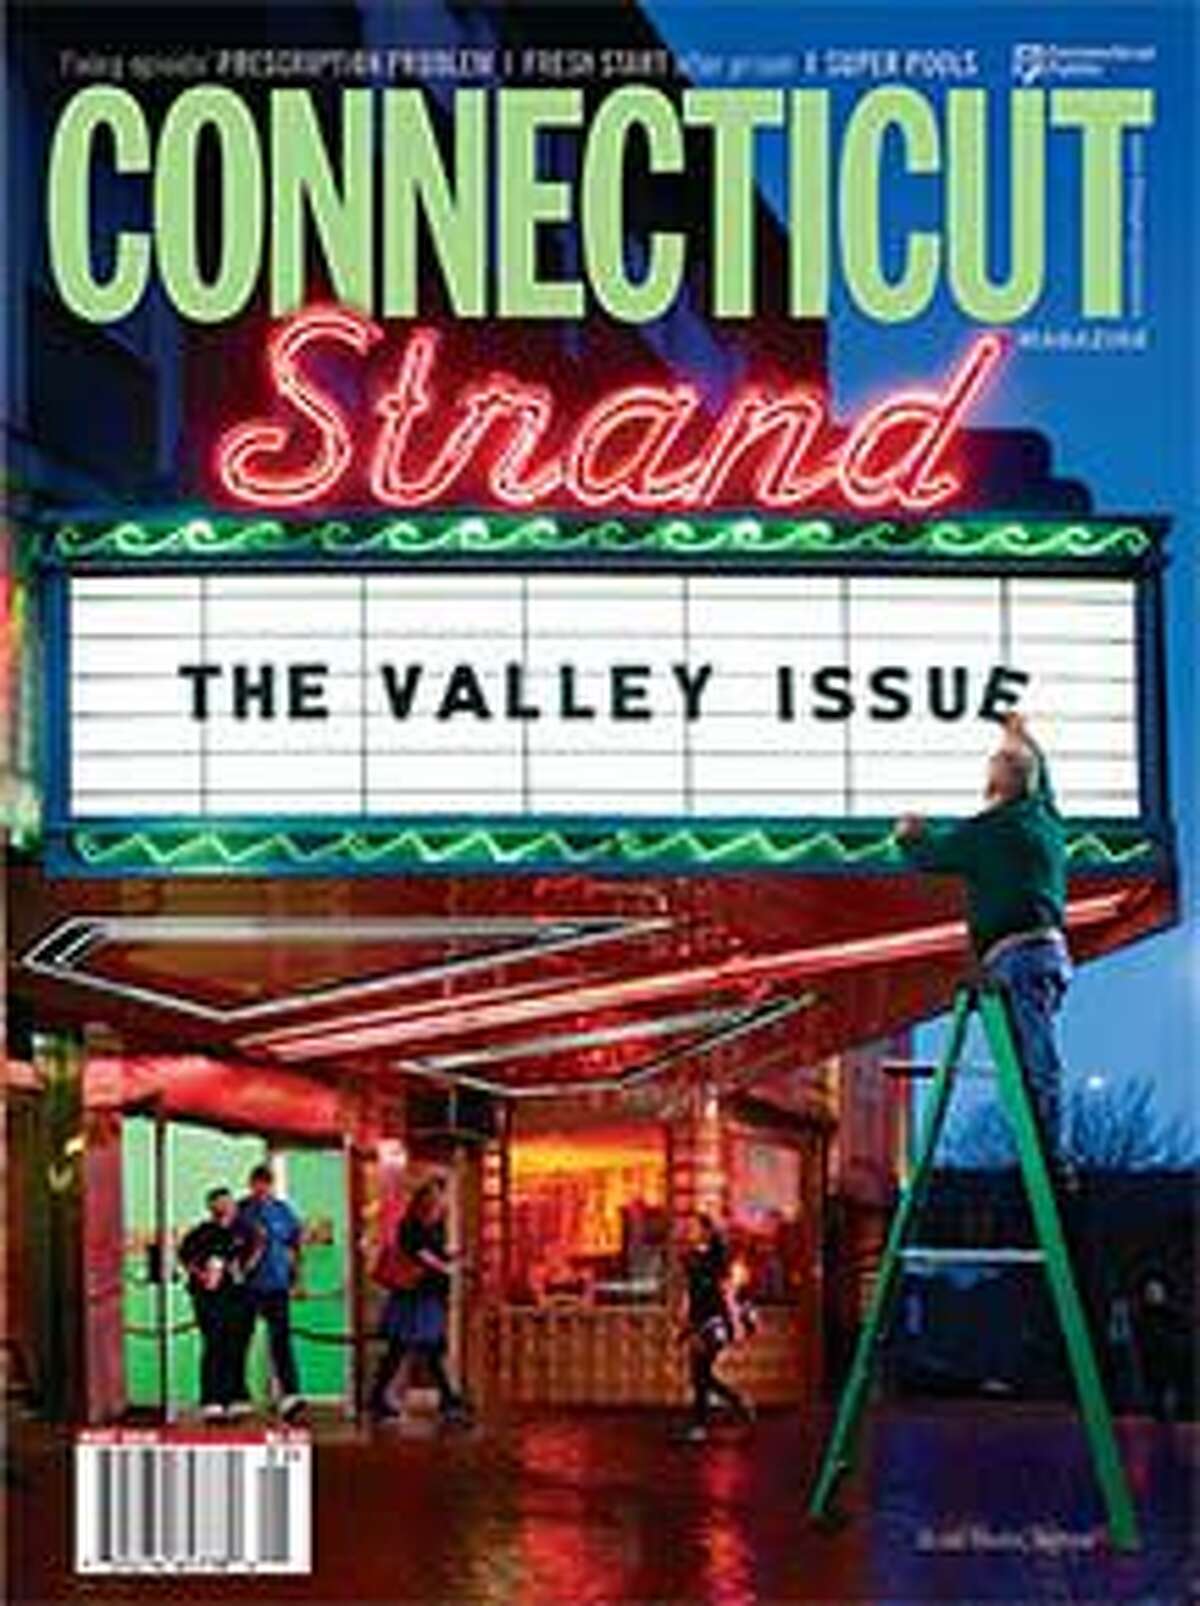 John Fanotto, who manages the Strand Theater in Seymour, puts the finishing touch on this month's magazine cover.